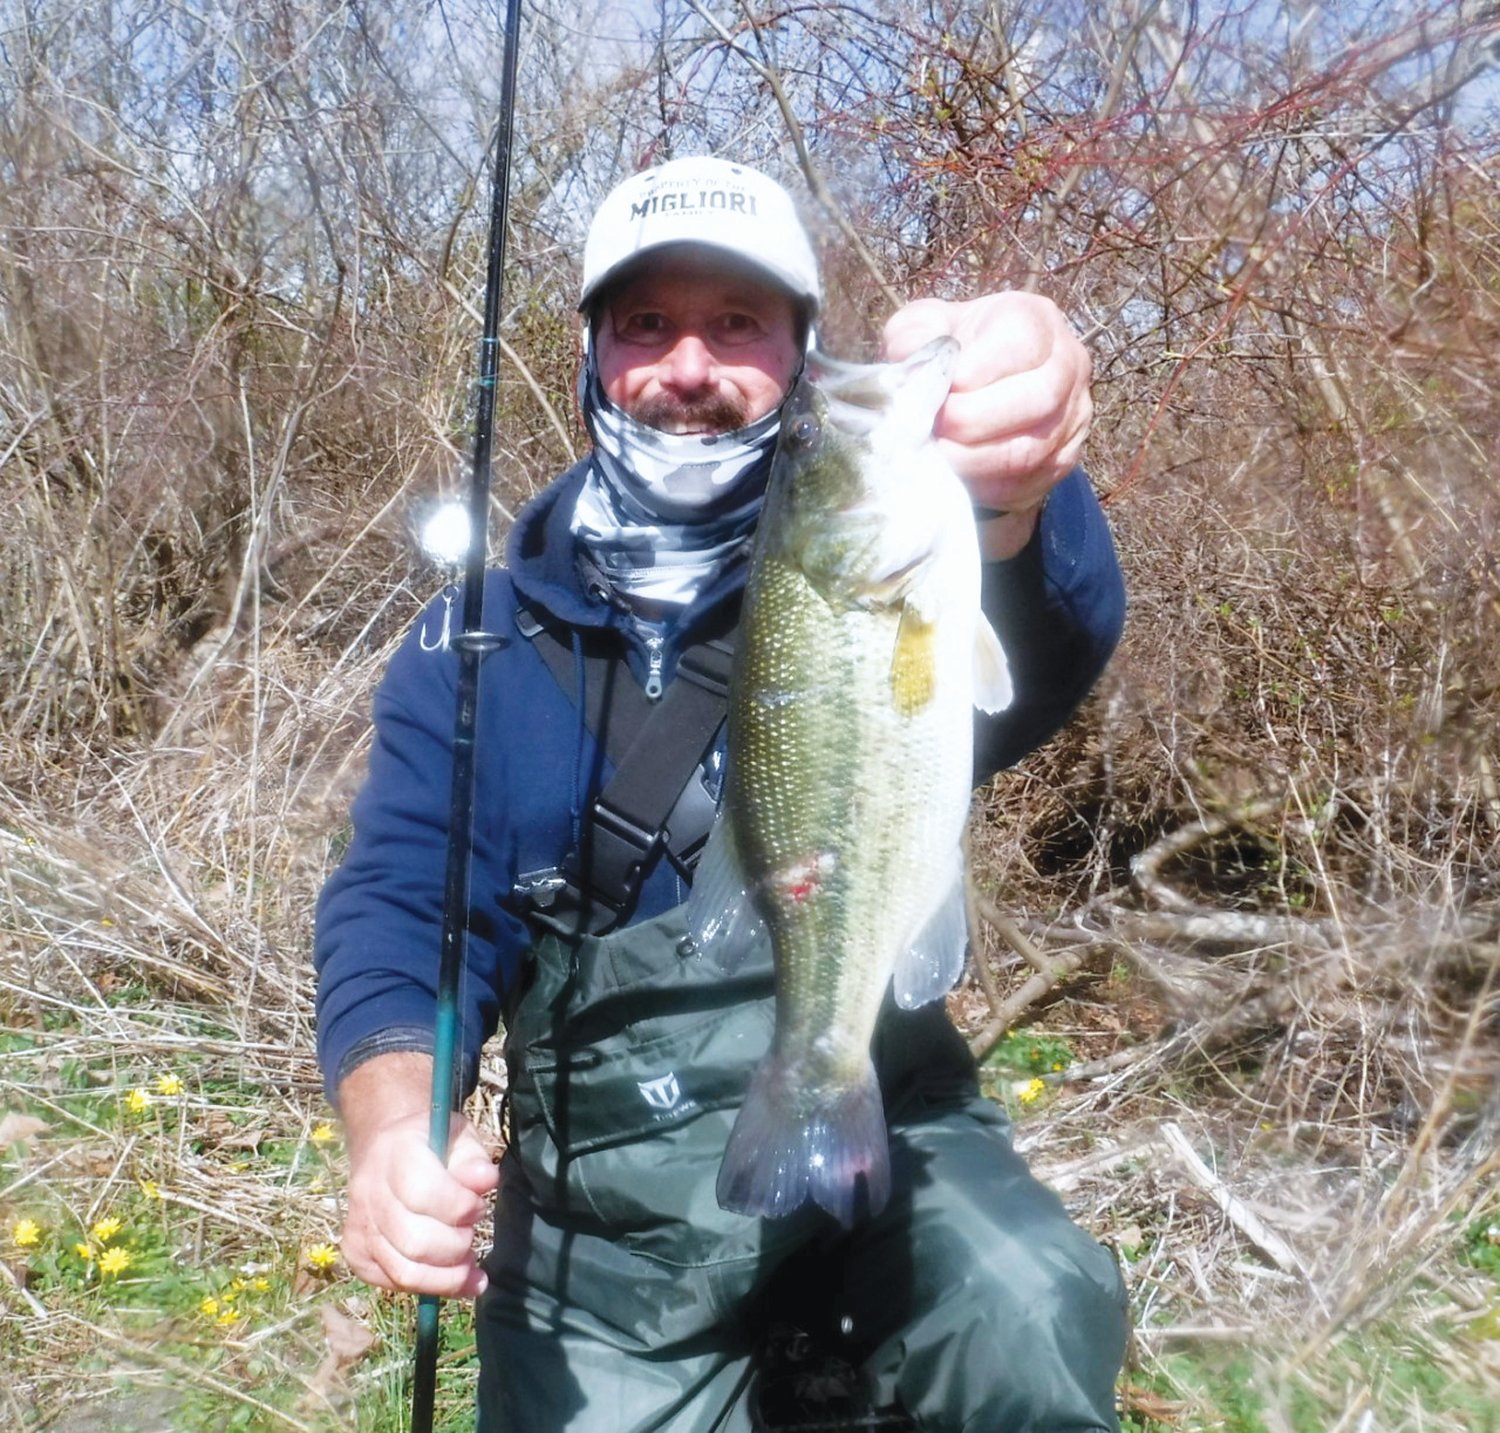 SPINNER BAITS WORKING: John Migliori of Aquidneck Island is catching largemouth bass and pickerel using a spinner bait changing out hook size depending on the targeted species. (Submitted photo)